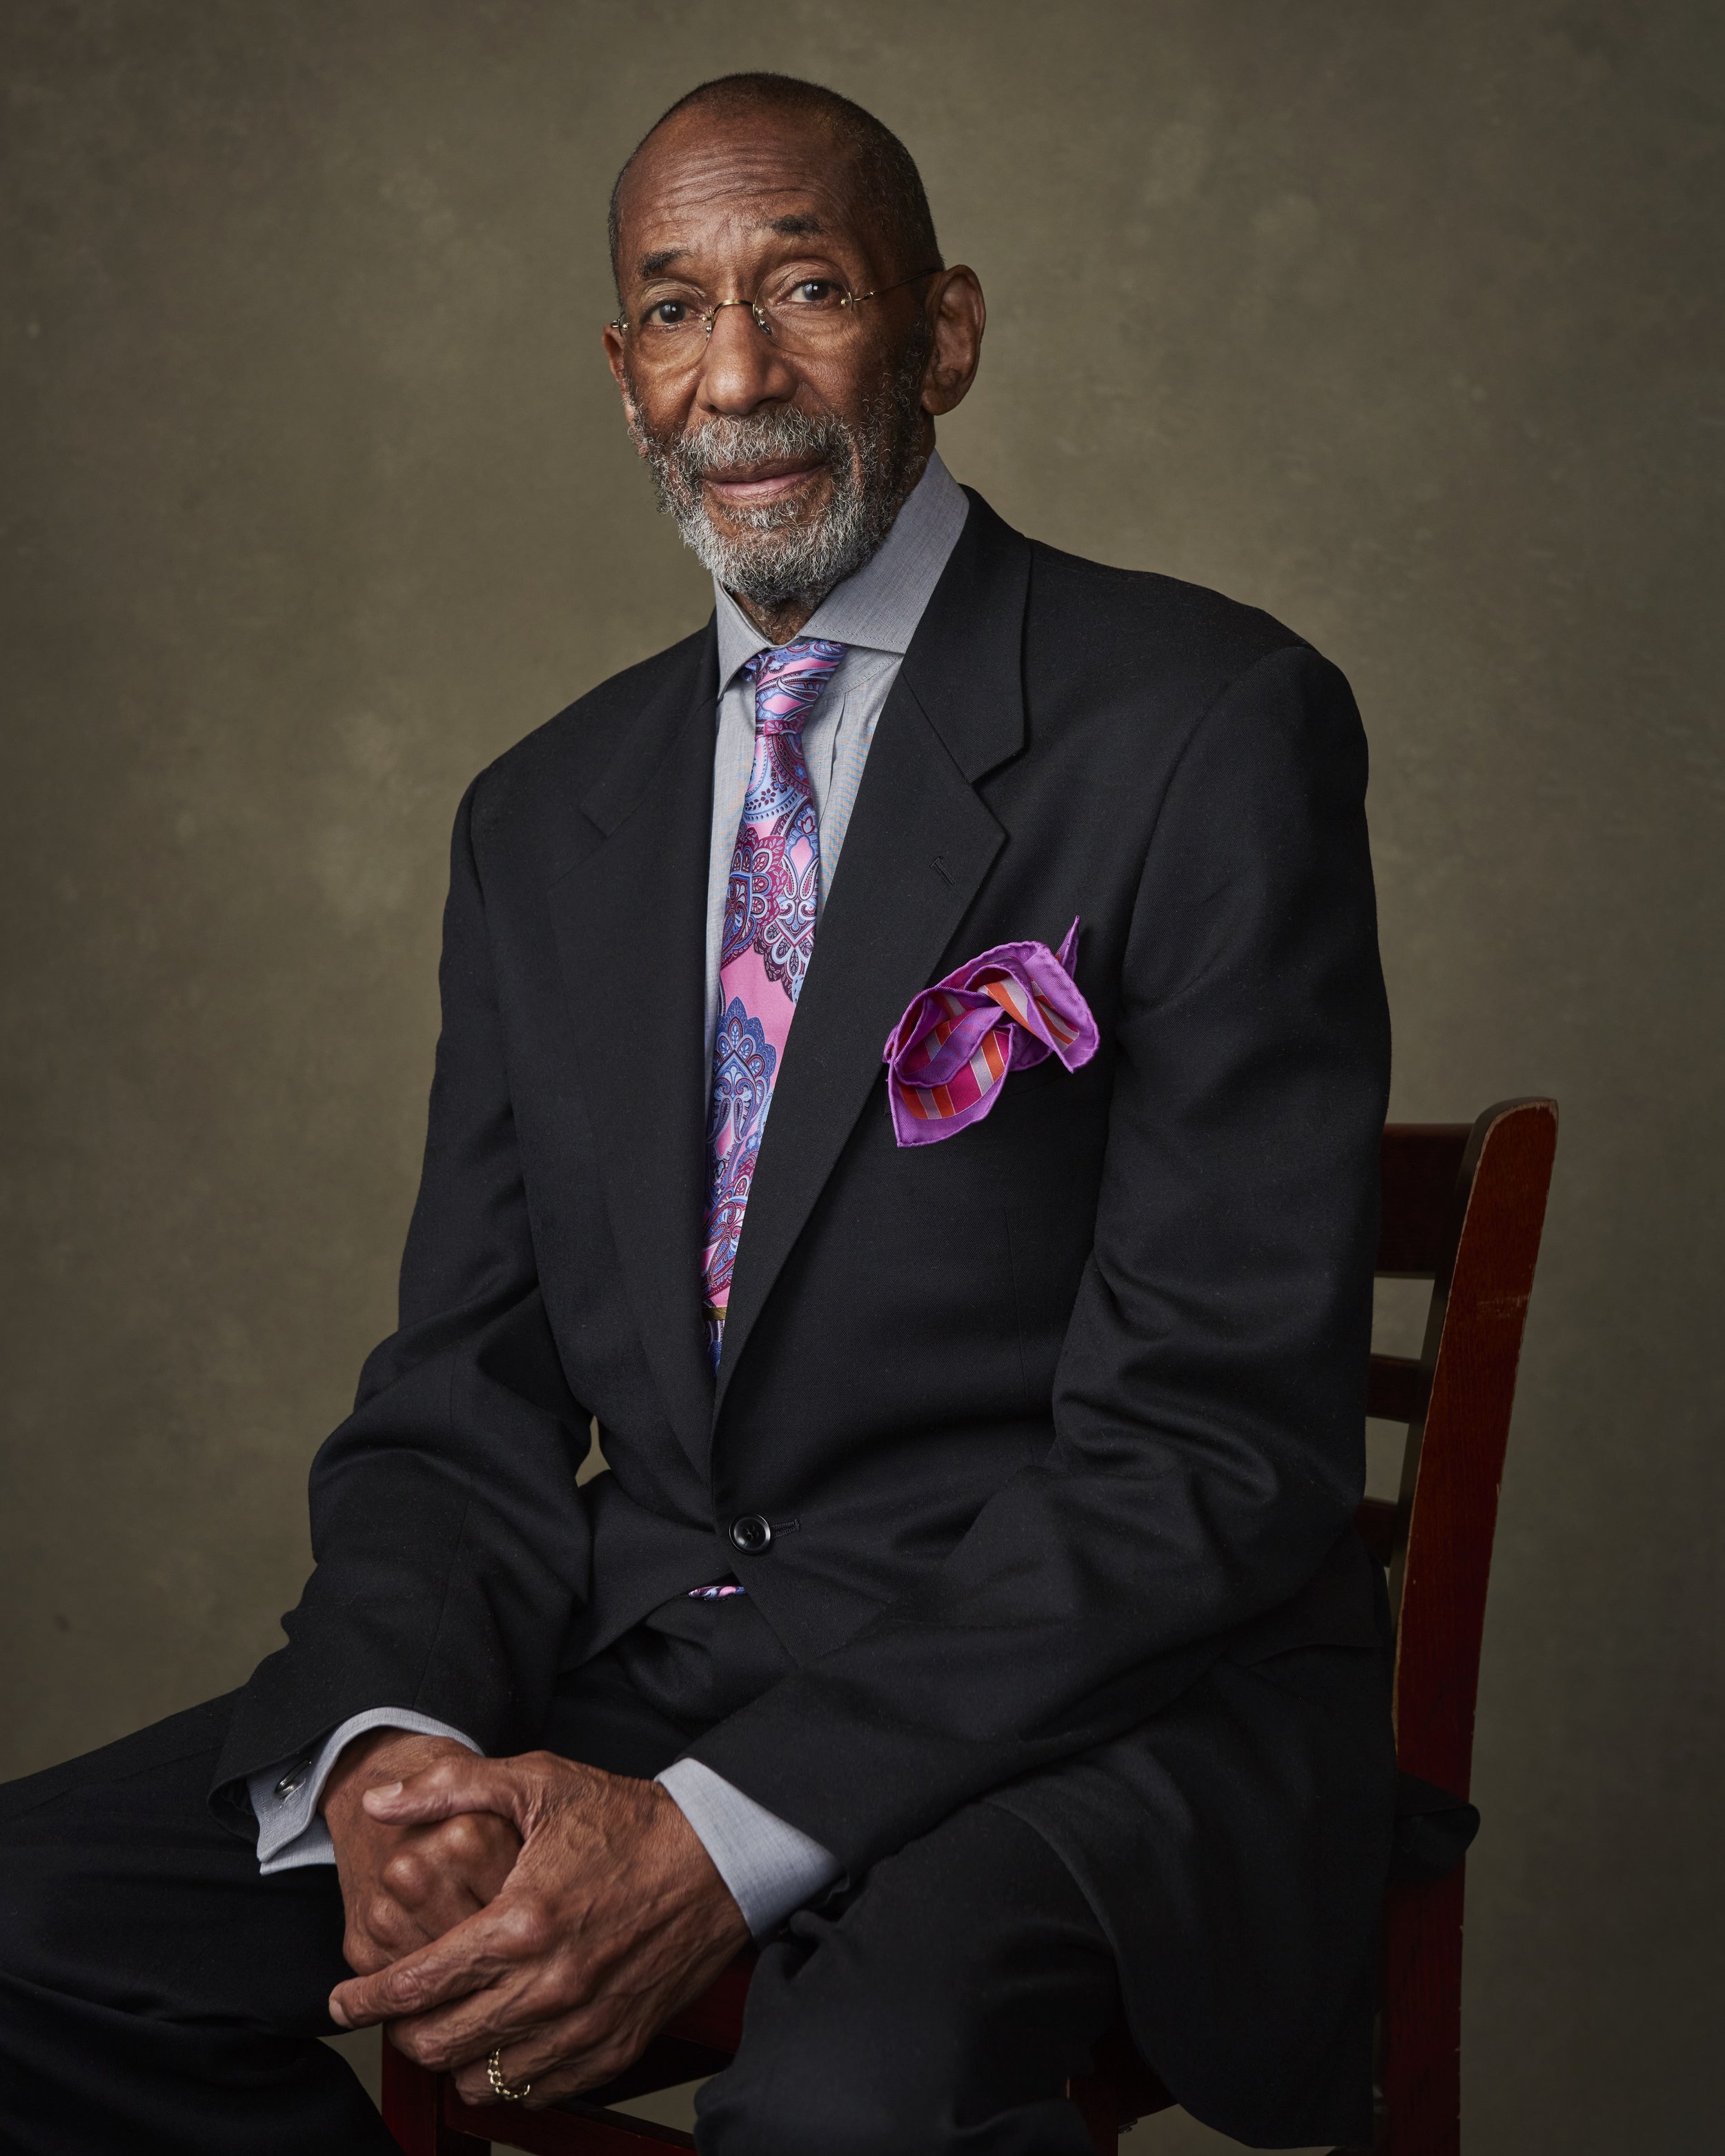   Ron Carter is recognized in the Guiness World records as the most recorded bassist. (Photograph by Adam Cantor)  